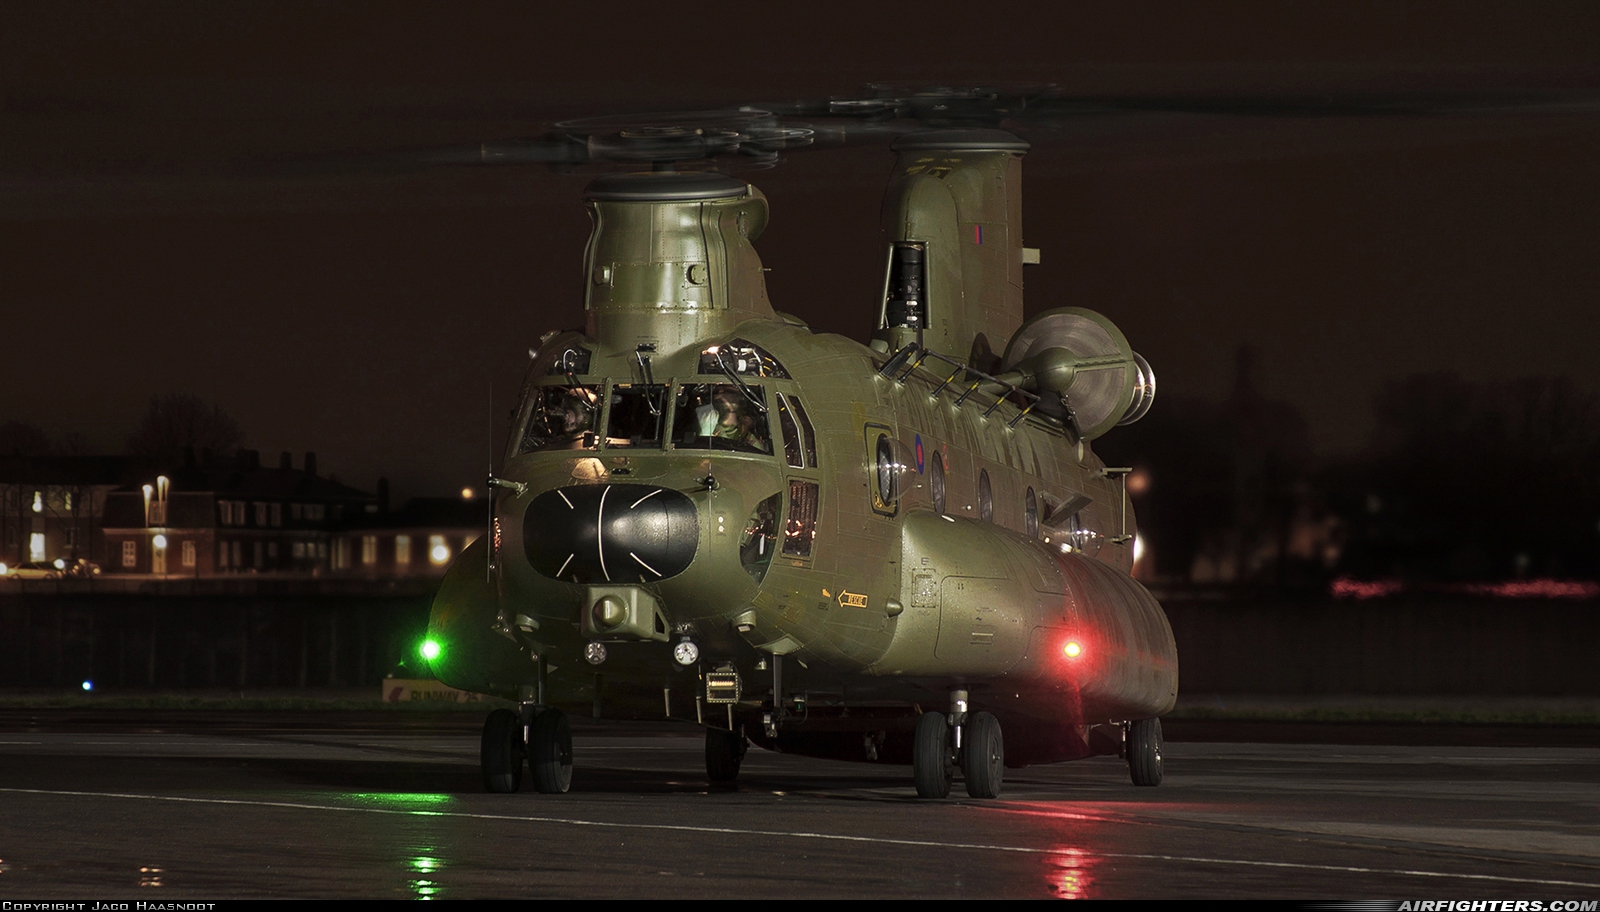 UK - Air Force Boeing Vertol Chinook HC3 (CH-47SD) ZH900 at Northolt (NHT / EGWU), UK